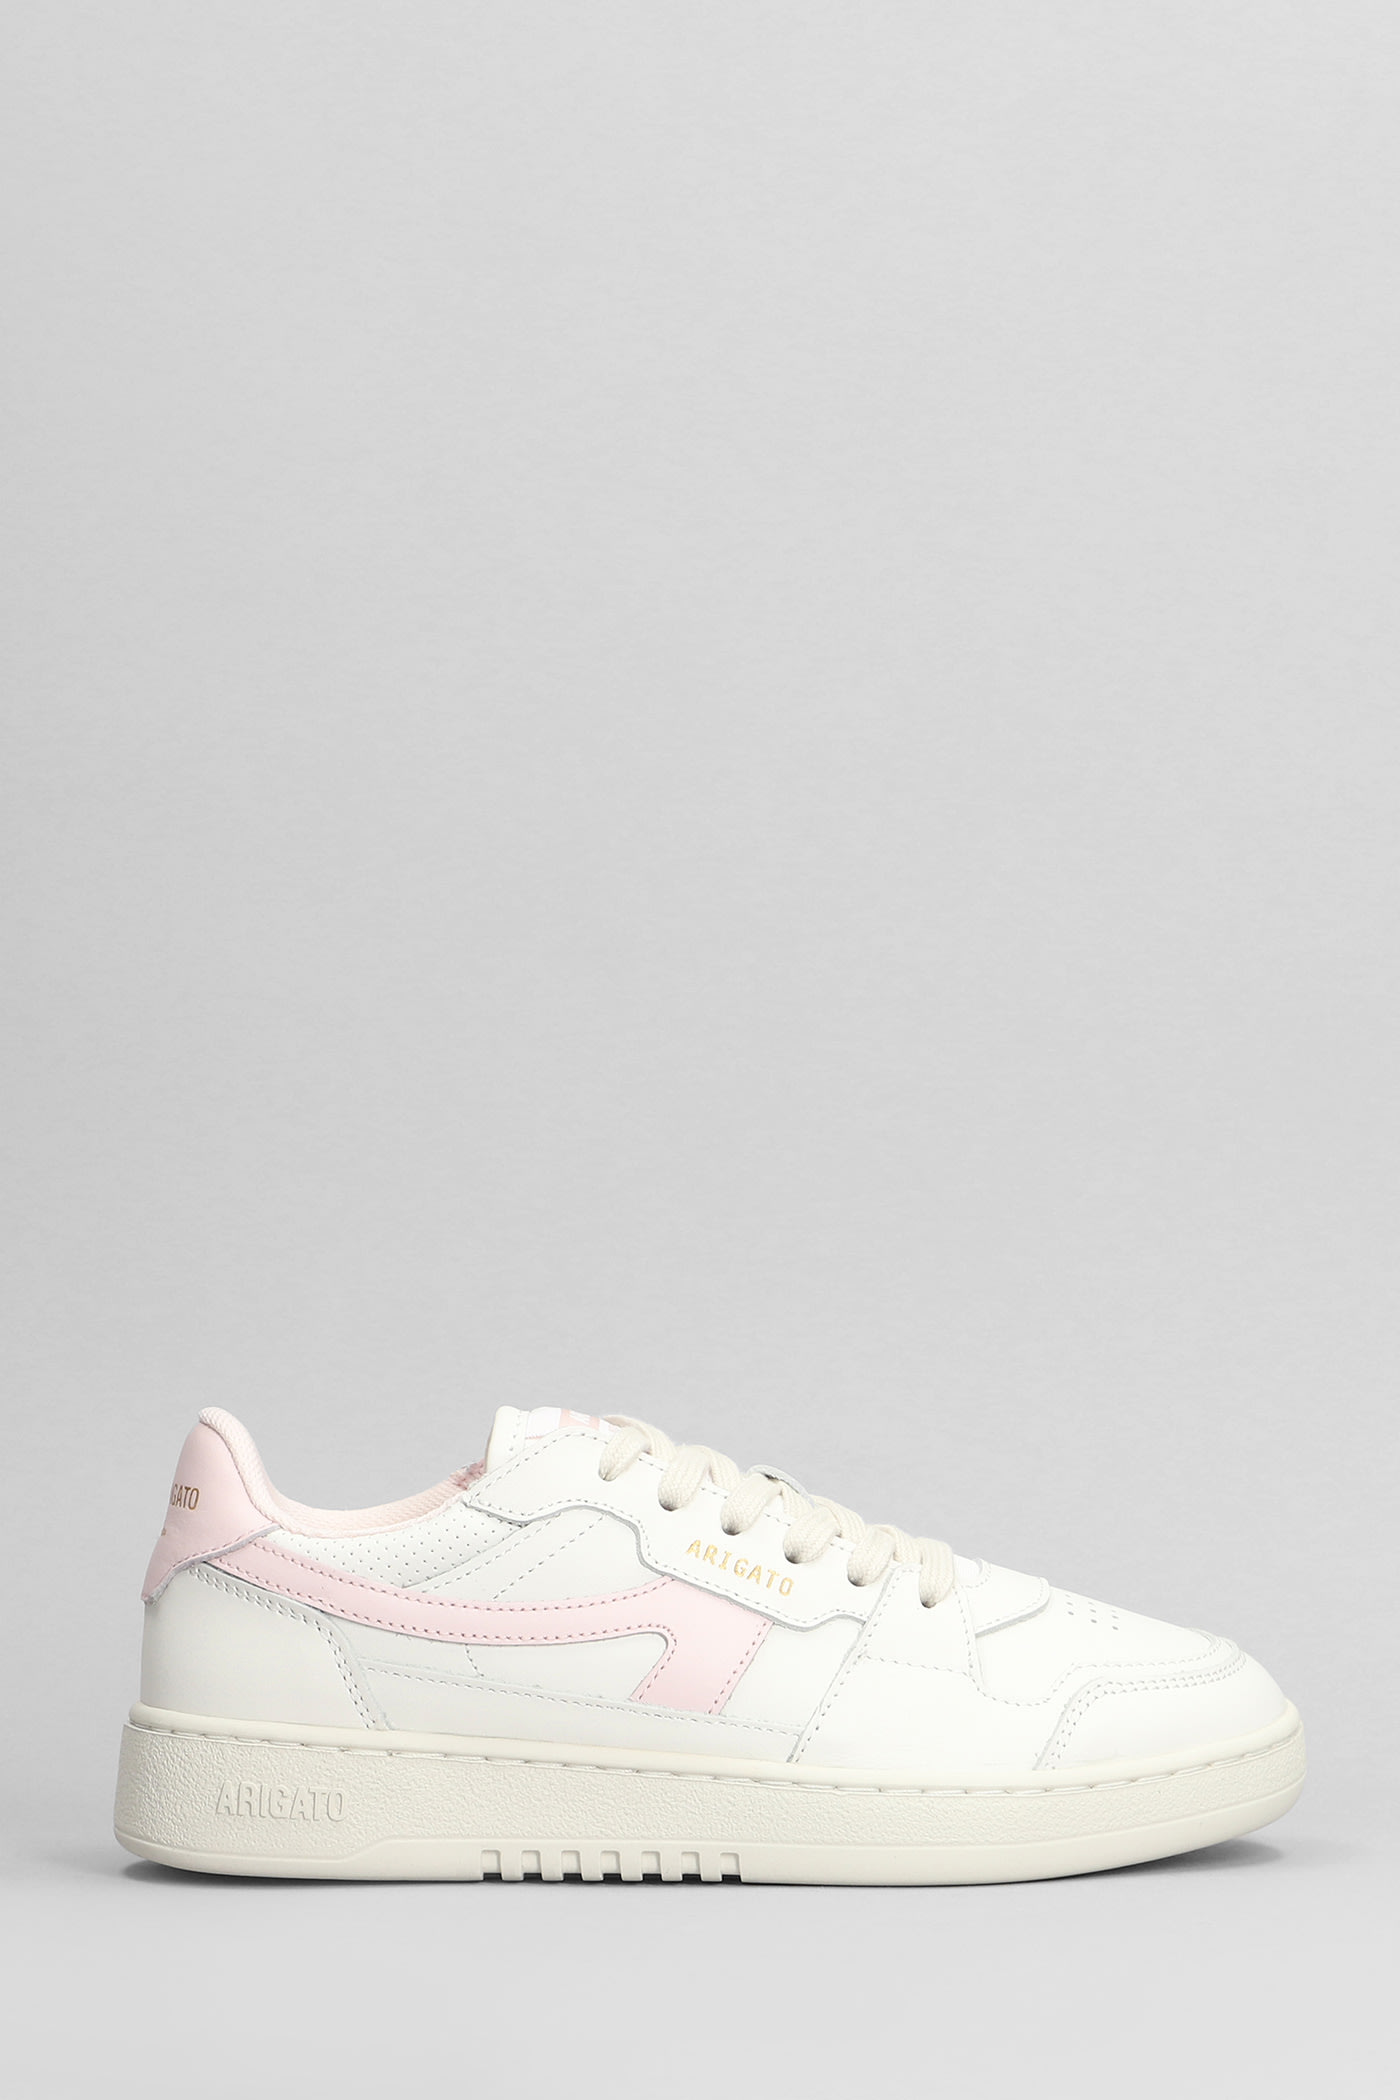 Shop Axel Arigato Dice-a Sneaker Sneakers In White Leather